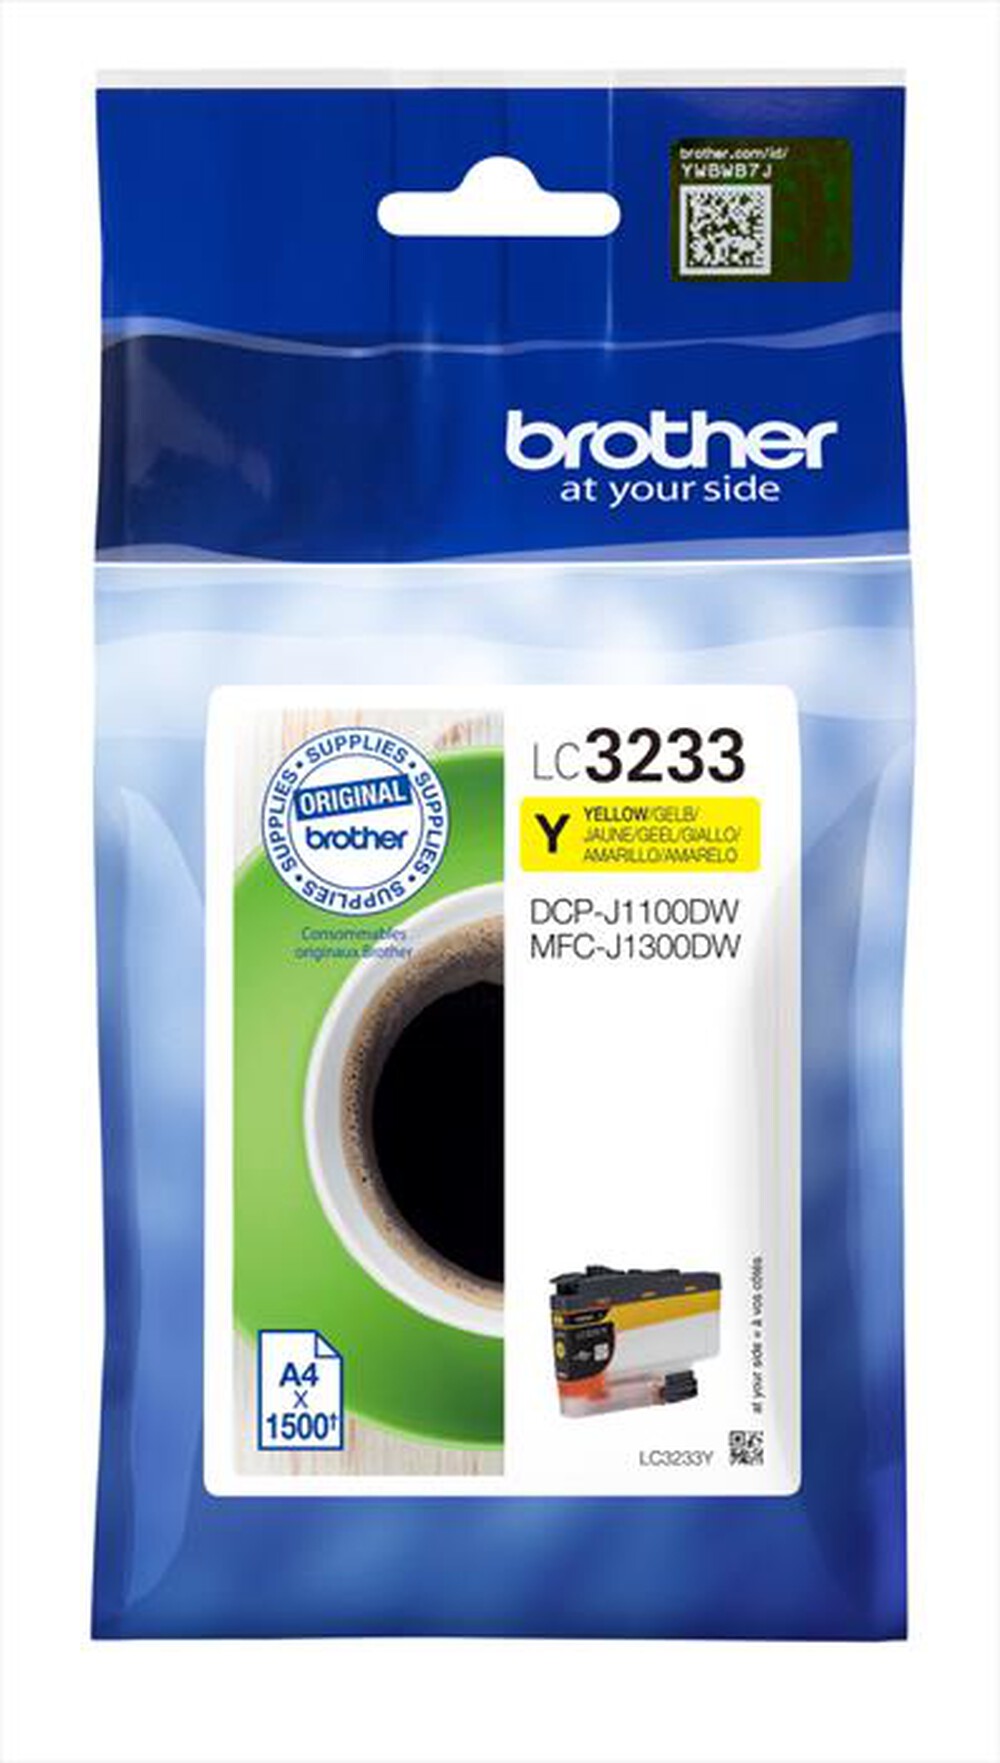 "BROTHER - LC3233Y"